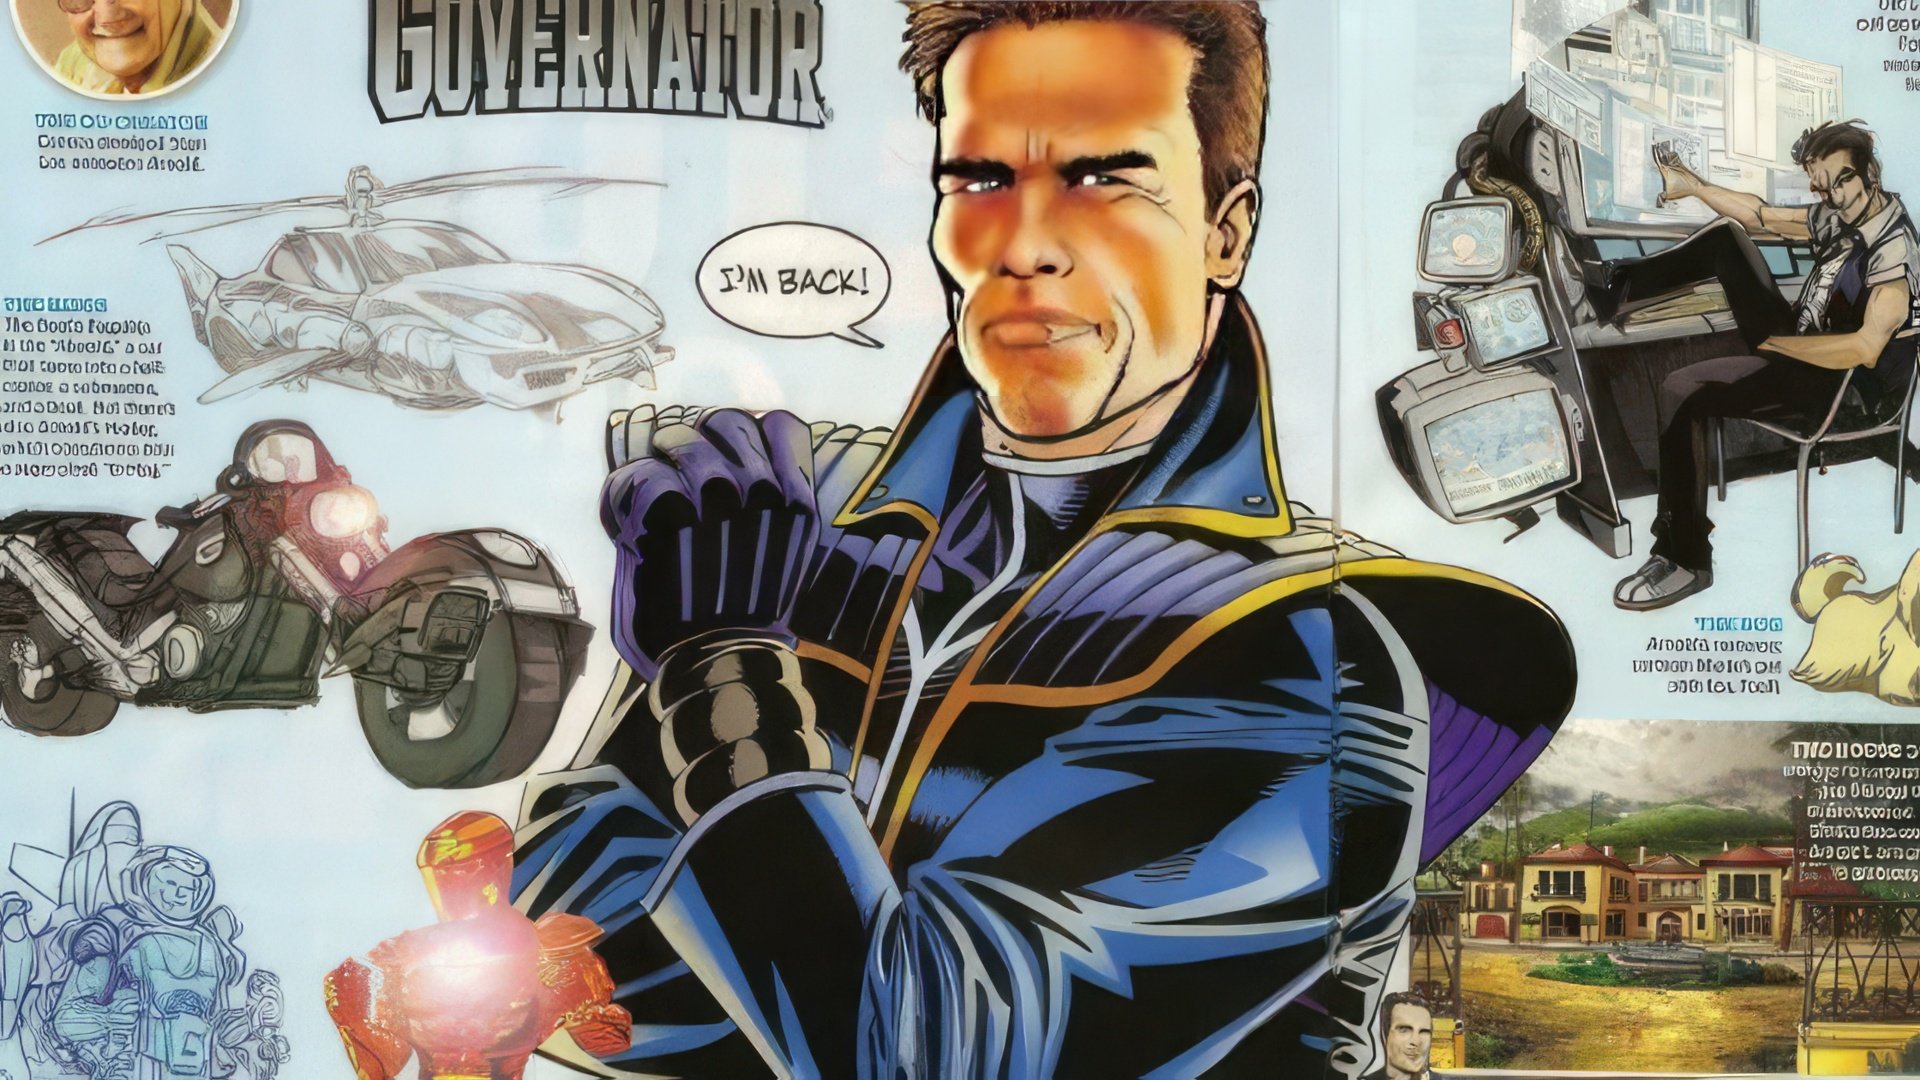 Stan Lee from Marvel wanted to make a comic about Schwarzenegger – The Governator